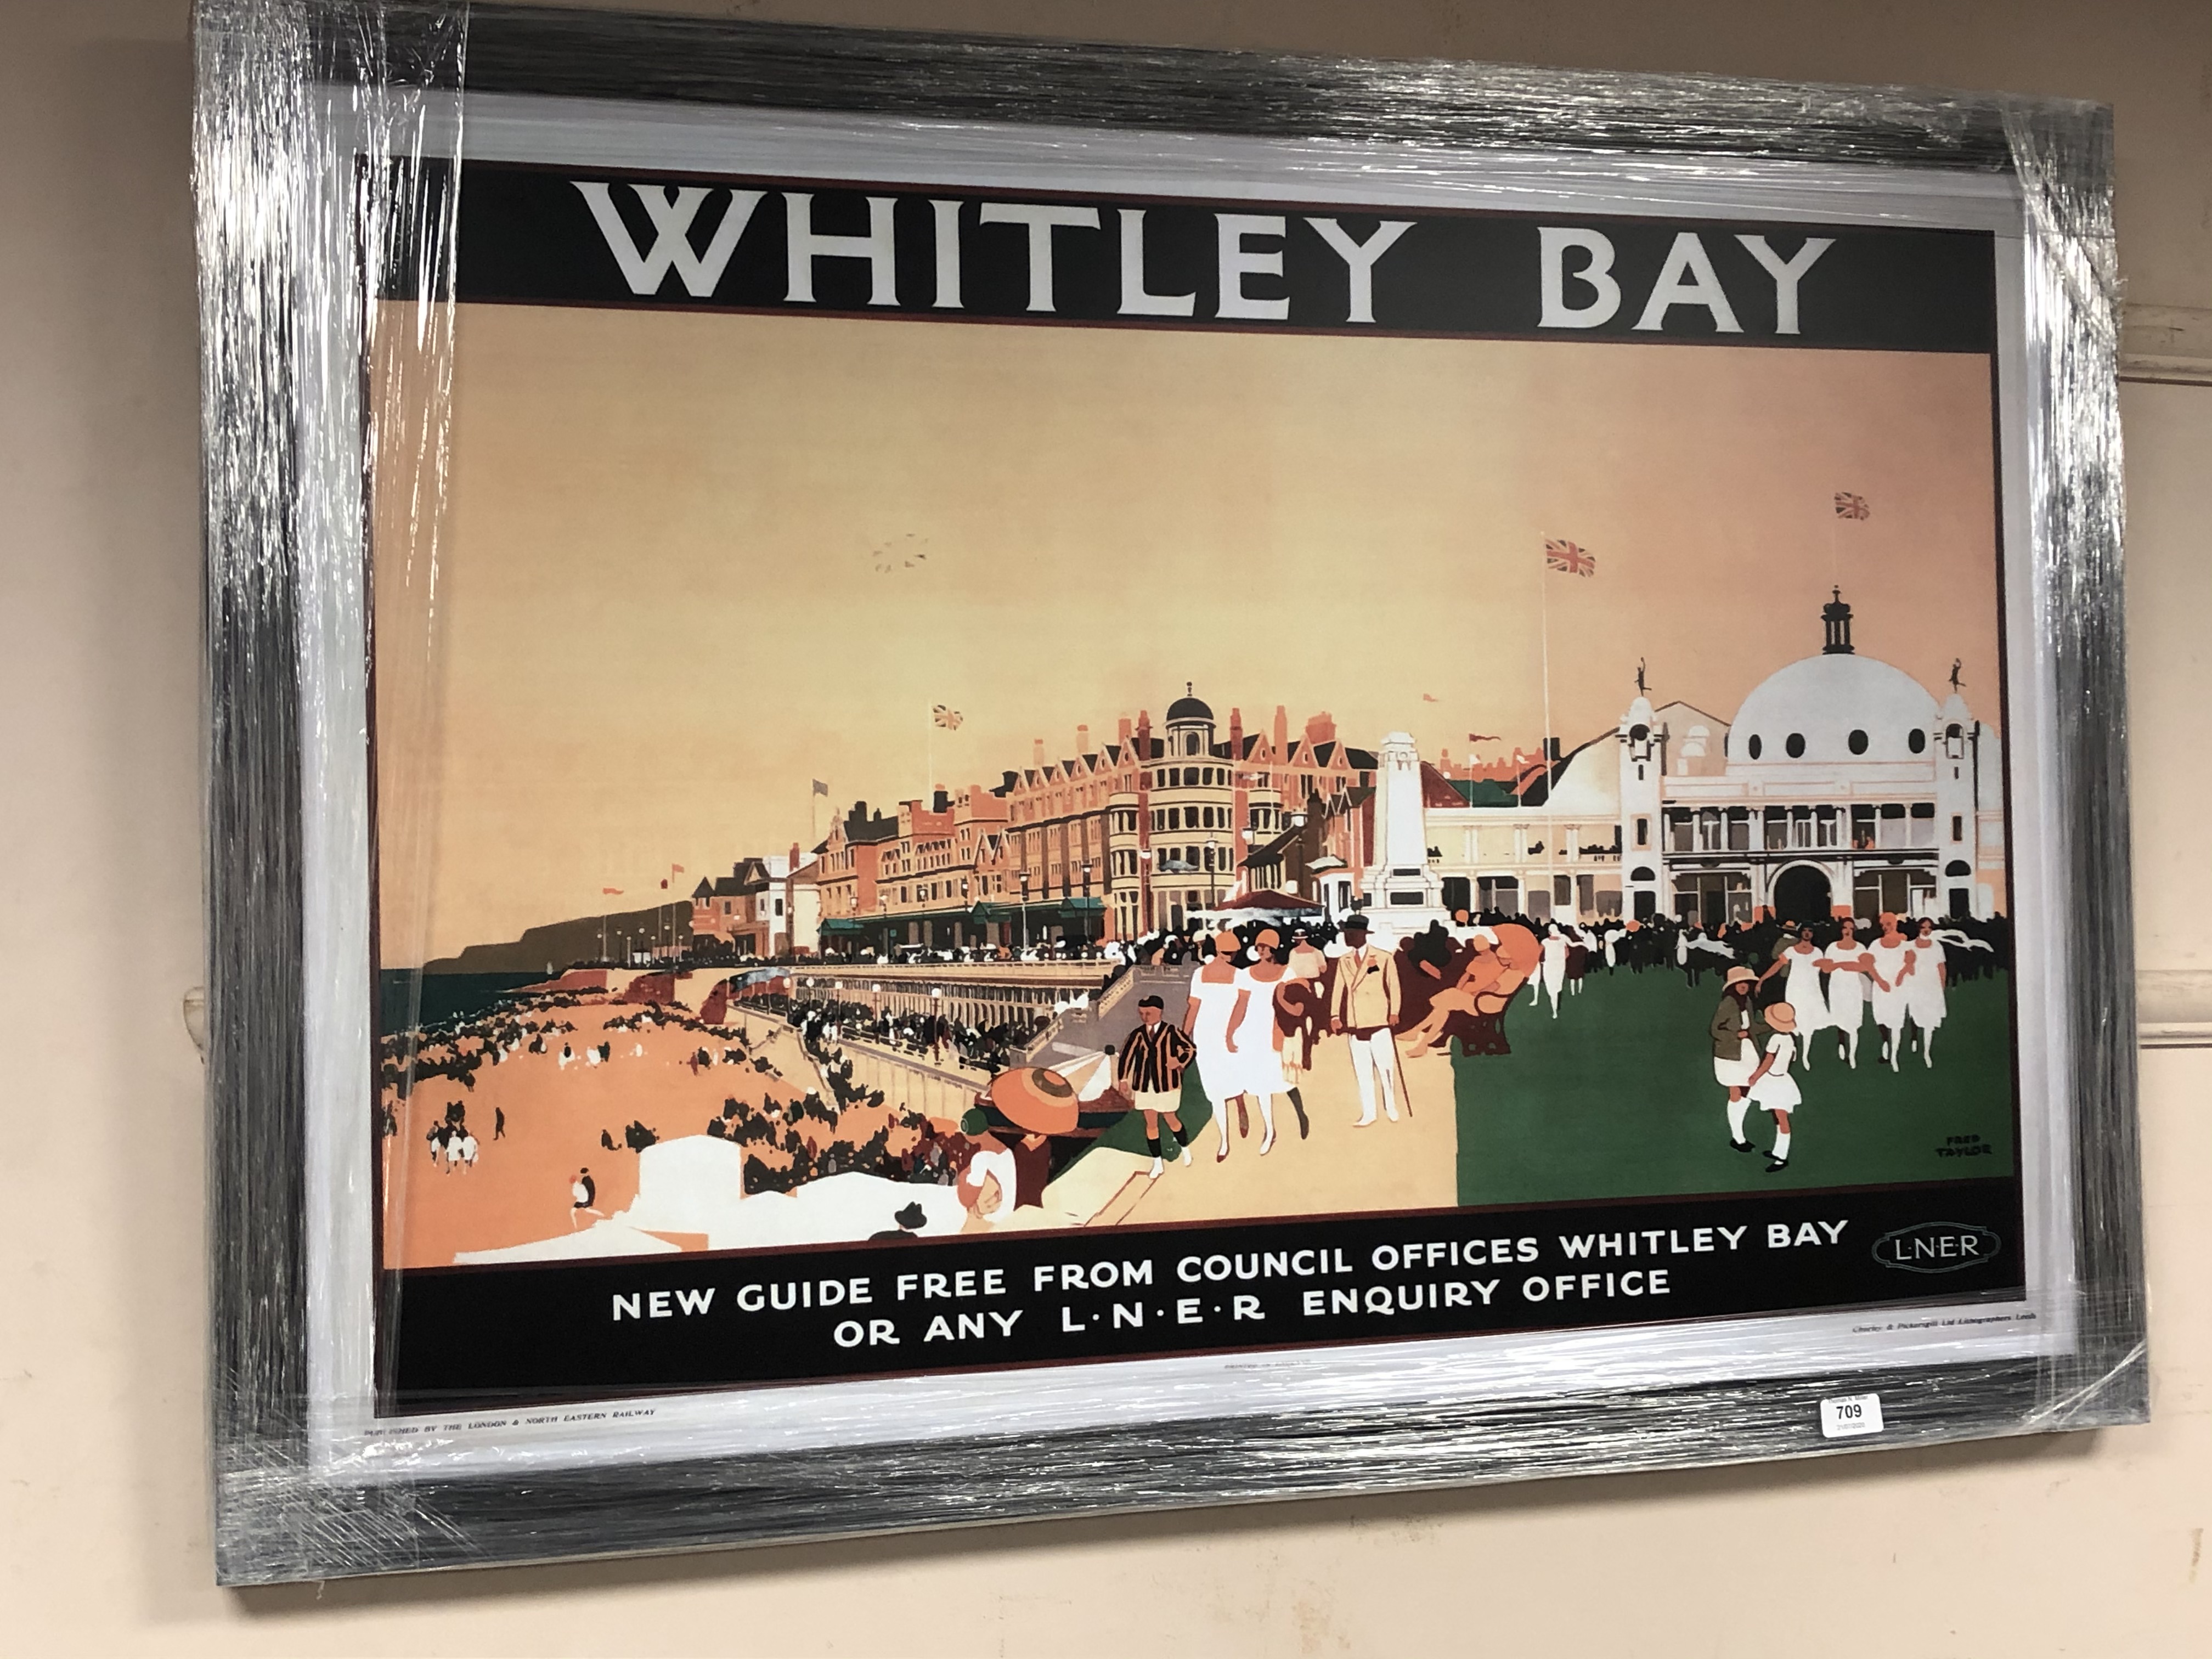 An advertising railway picture - Whitley Bay